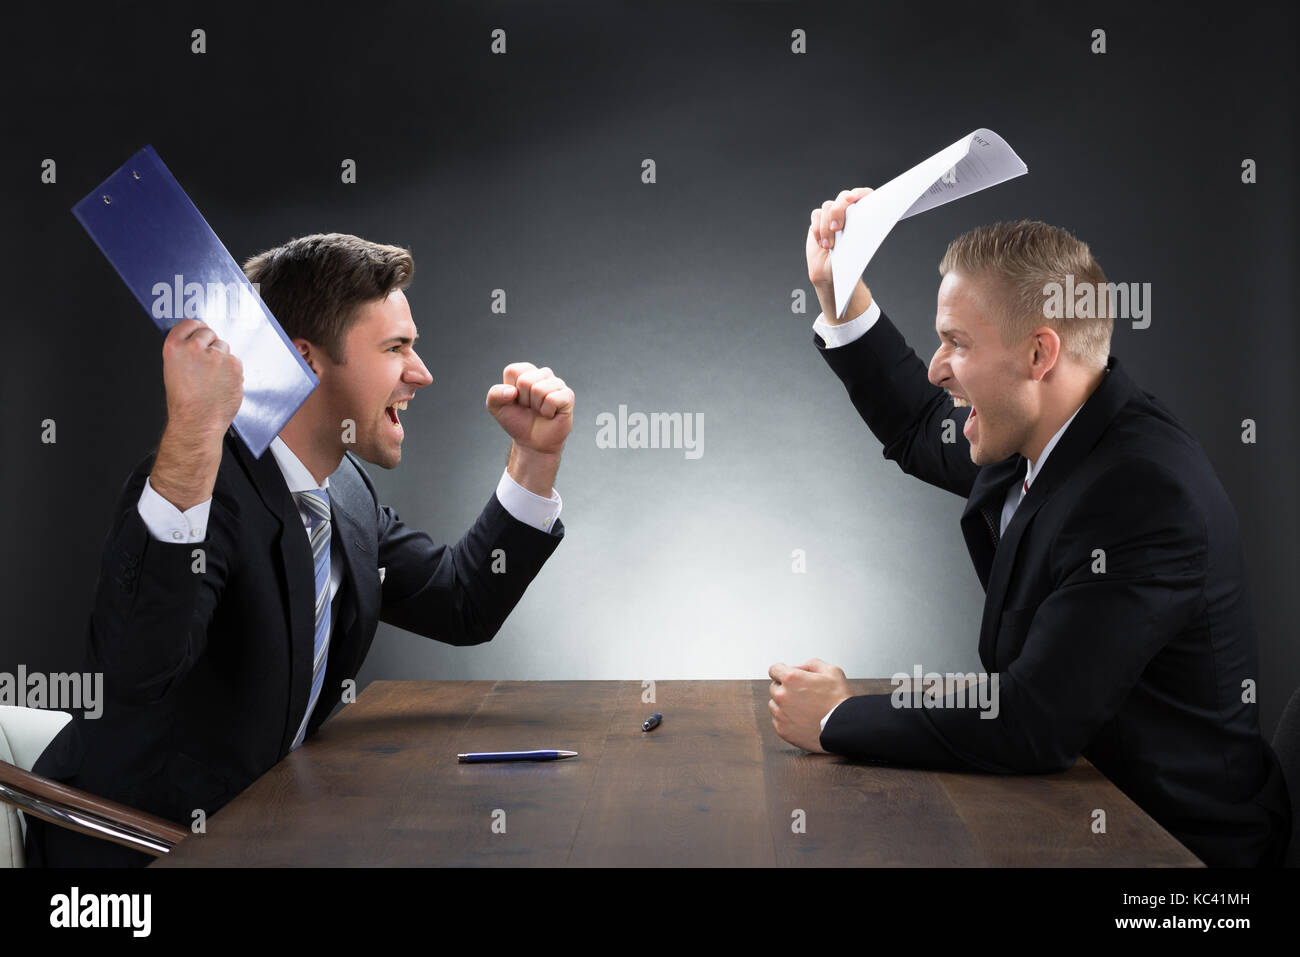 Aggressive young businessmen arguing at wooden desk against gray background Stock Photo